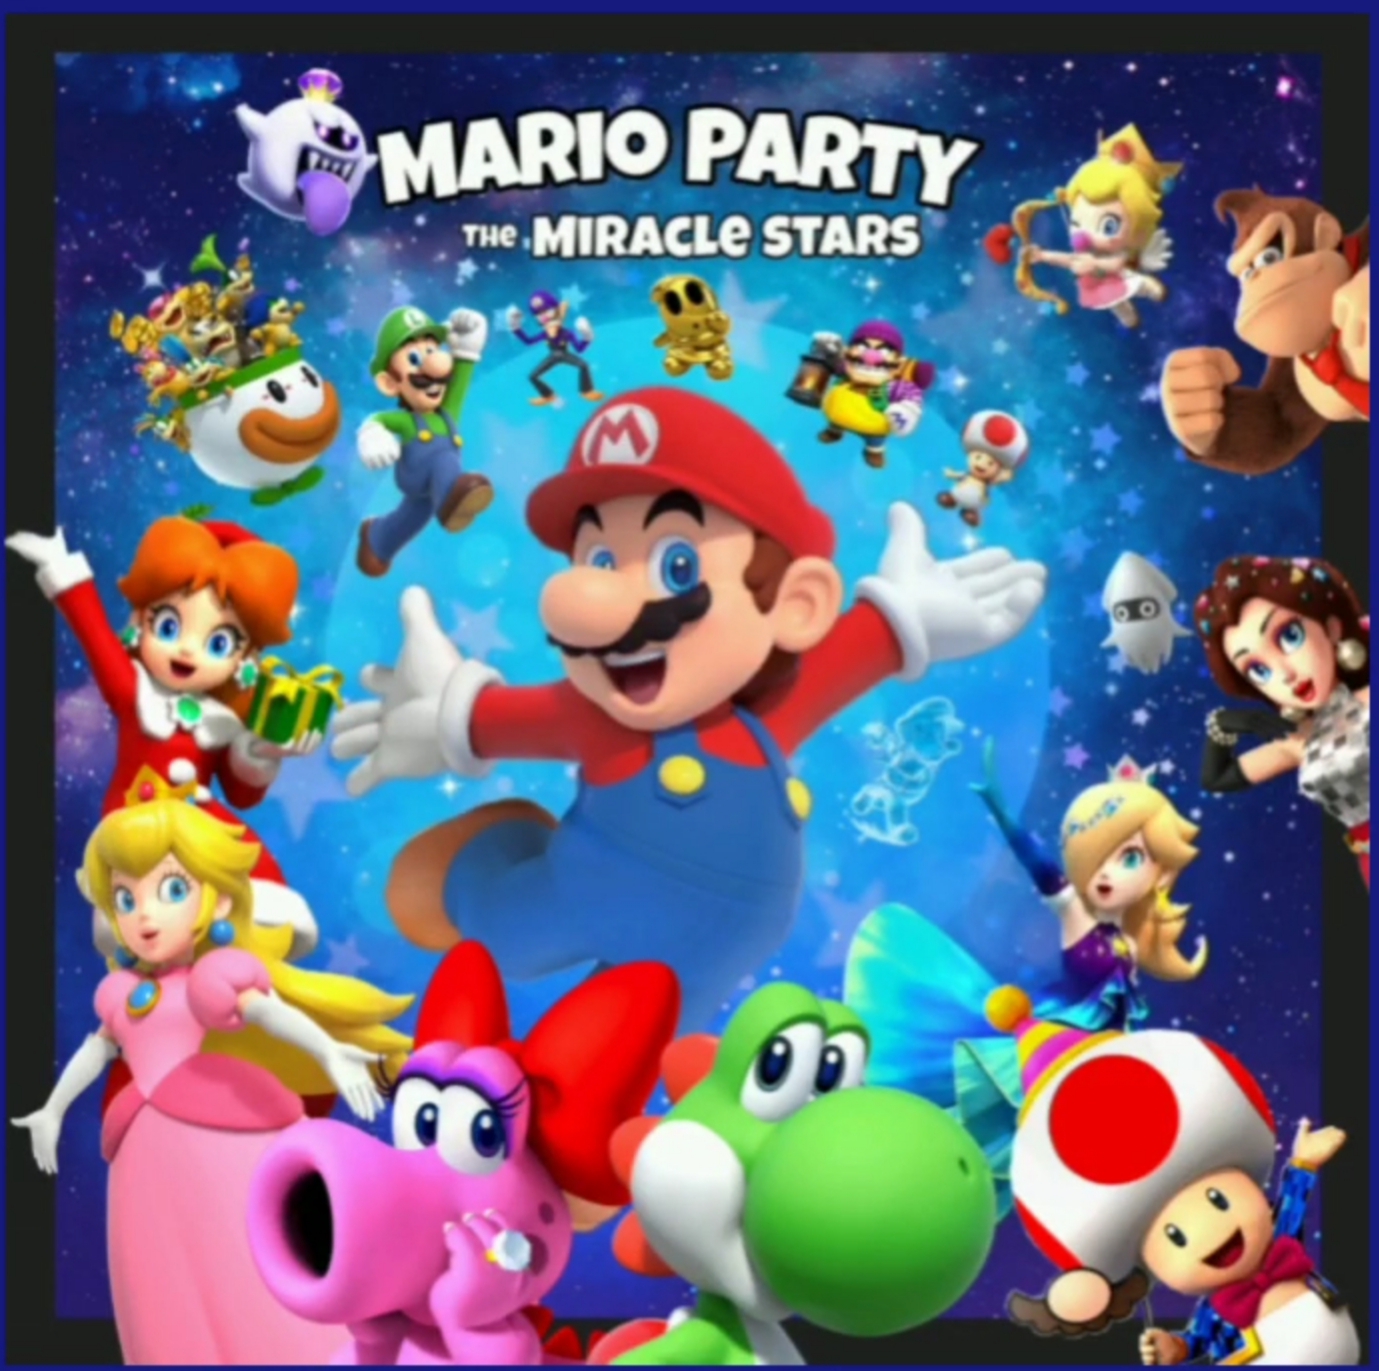 Mario Party: The Miracle Stars, Fantendo - Game Ideas & More